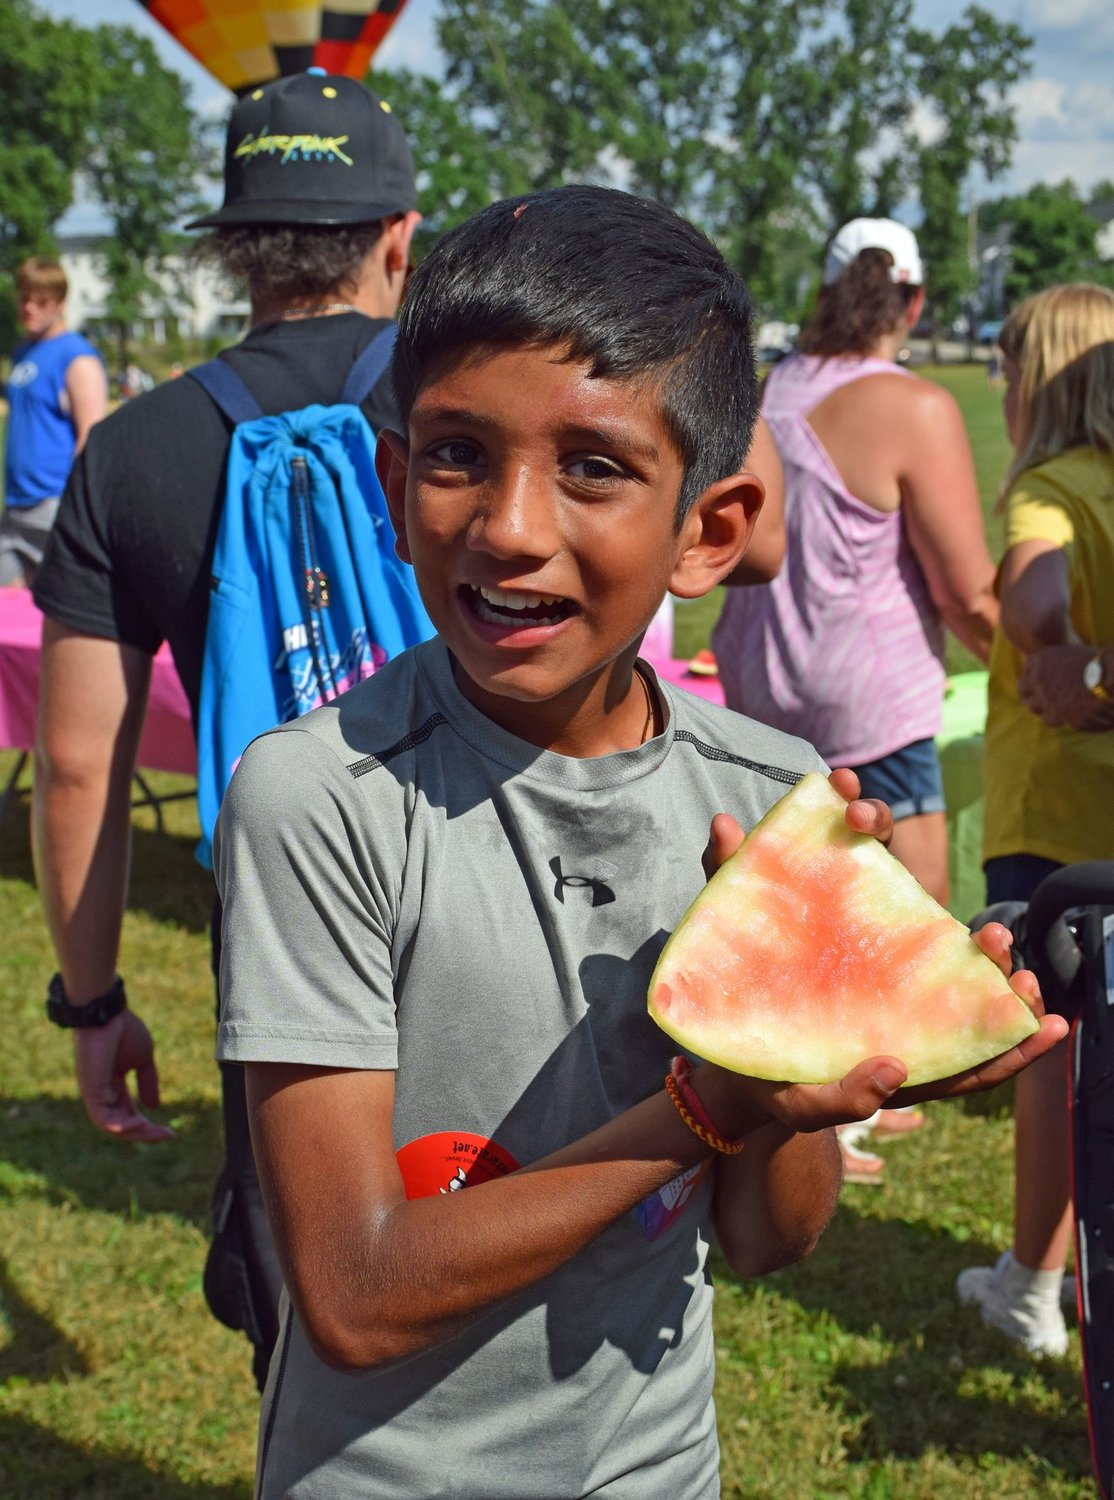 Vansh Patel, 10, of Perkasie, tied for the win in the Watermelon Eating Contest 12 and under, with (not pictured) Nathan Ritting, 10, of Perkasie, and Alice Westley, 8, of Harleysville.